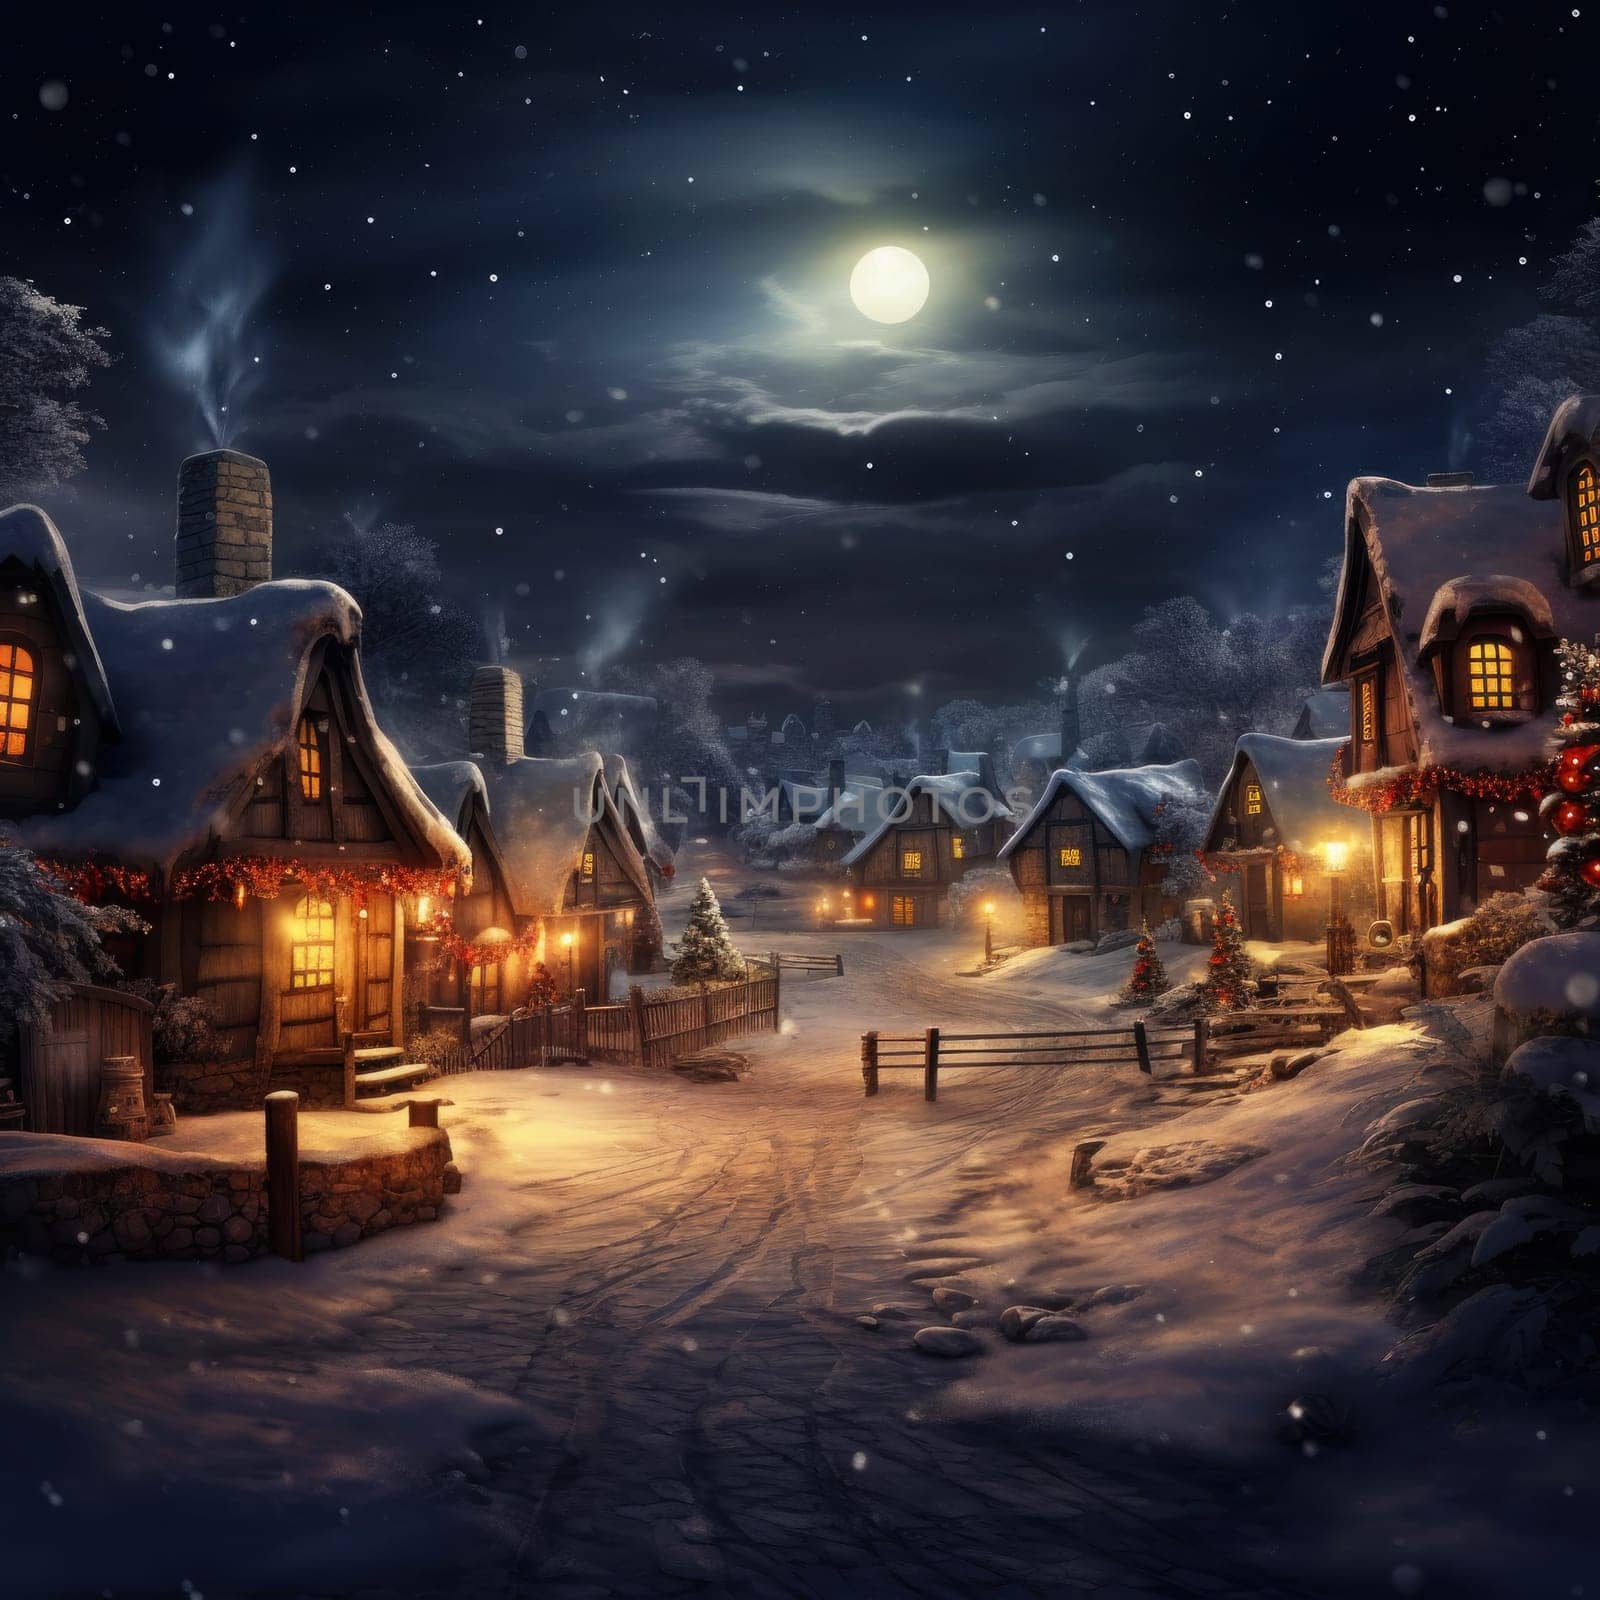 Vintage style snowy Christmas village scene street with street lamps by andreyz